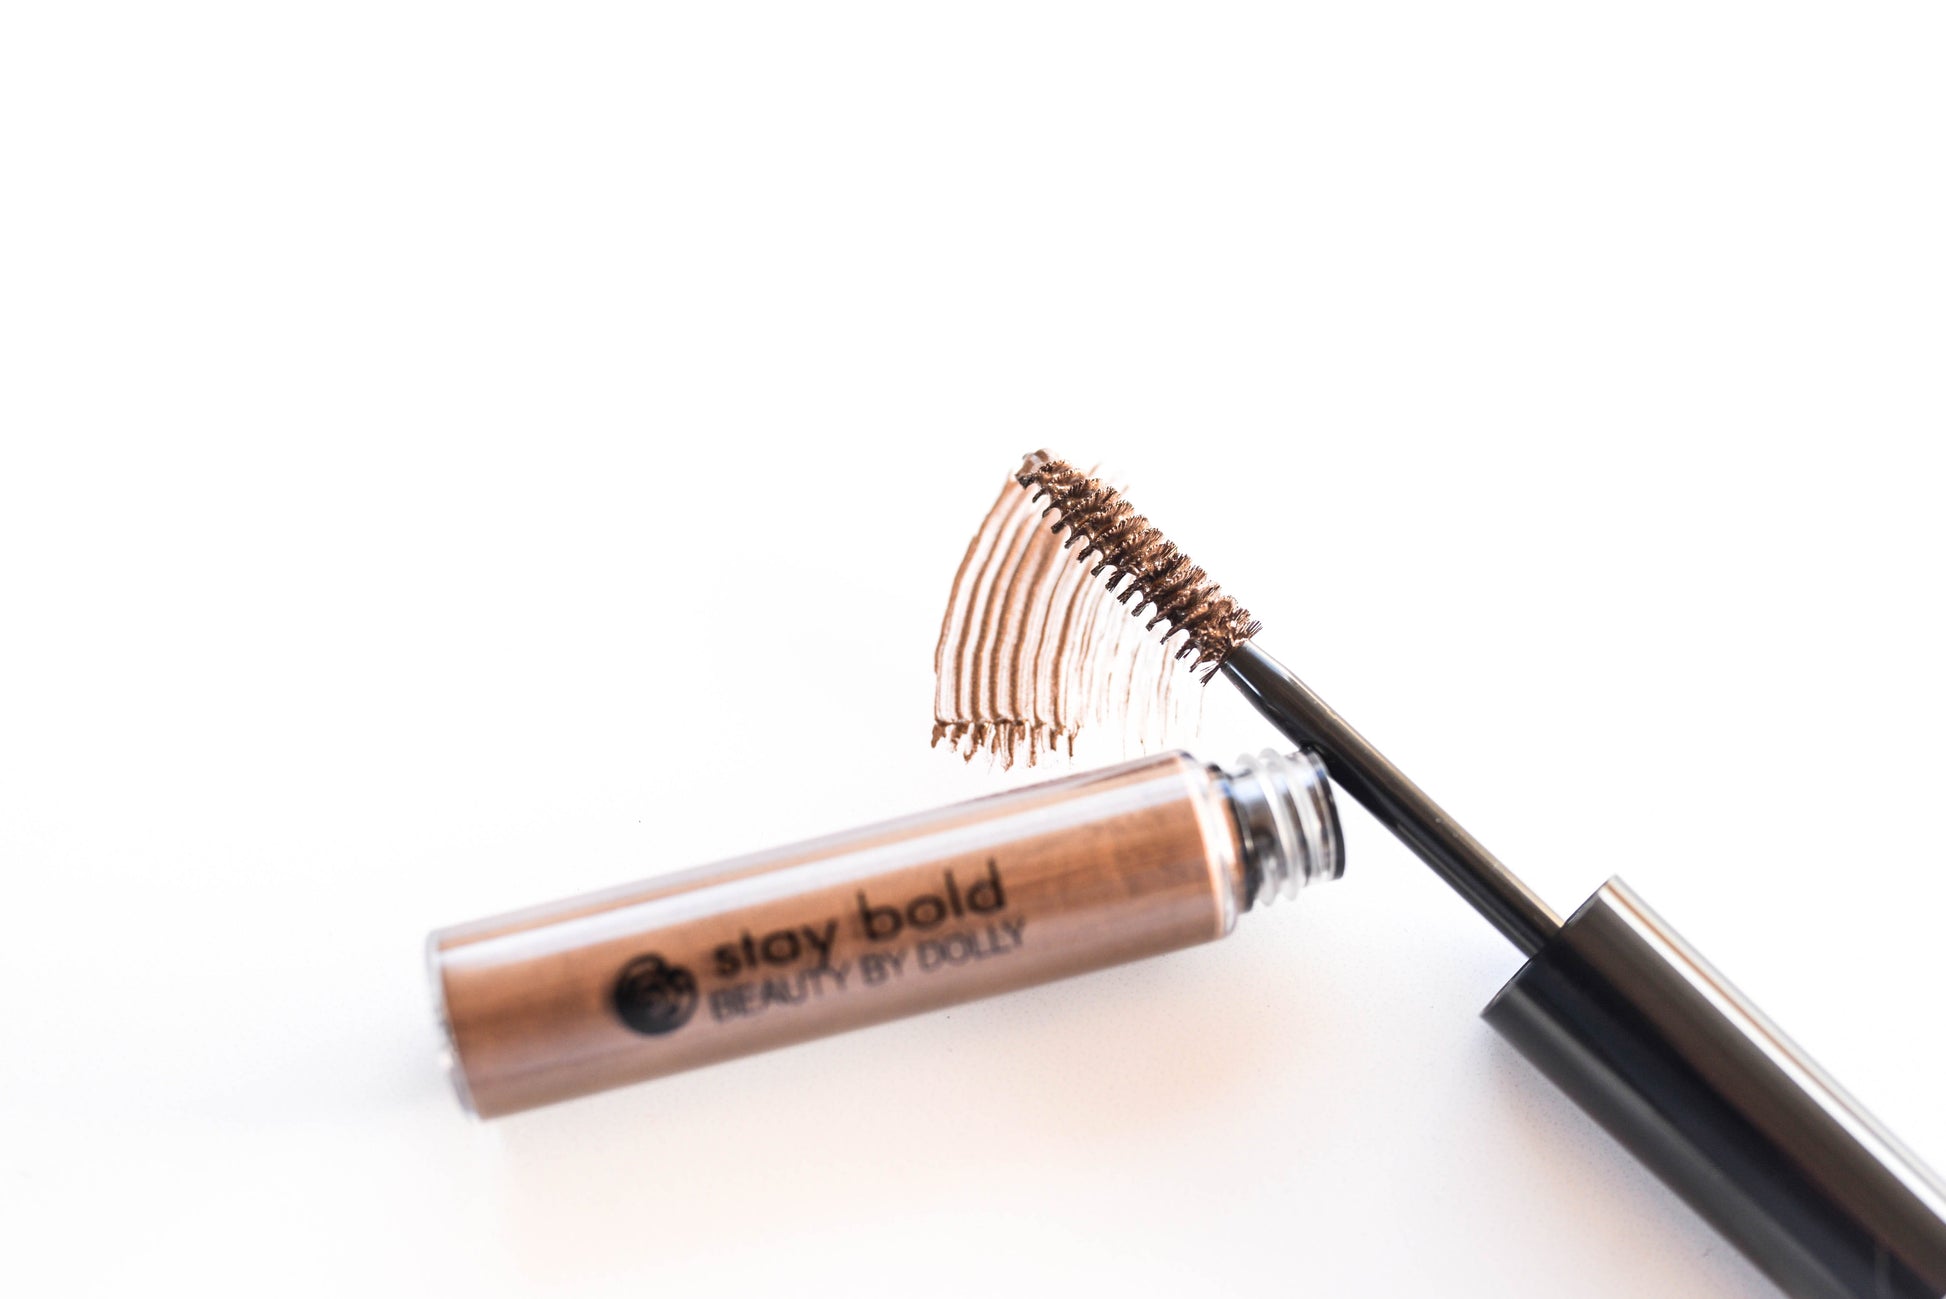 Stay Bold: Tinted Brow Gel - Beauty by Dolly